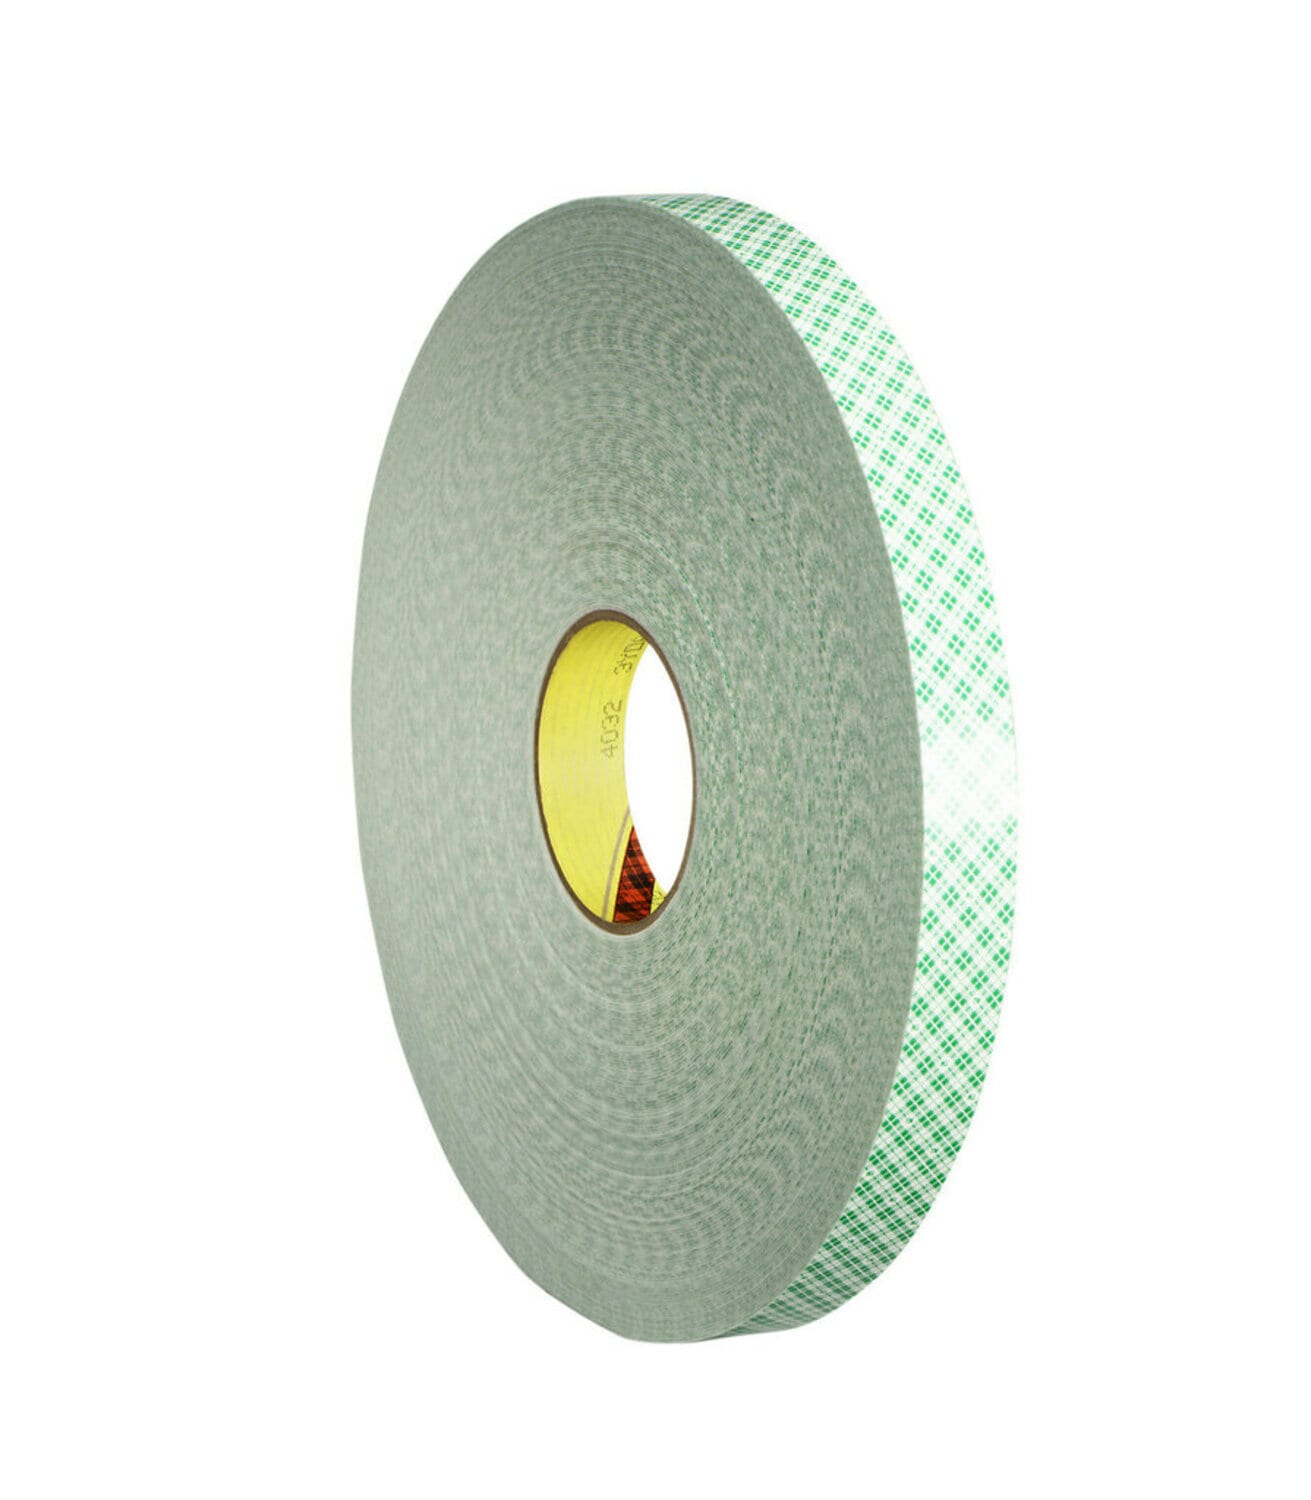 7010331686 - 3M Double Coated Urethane Foam Tape 4032, Off White, 4 in x 72 yd, 31
mil, 2 Rolls/Case